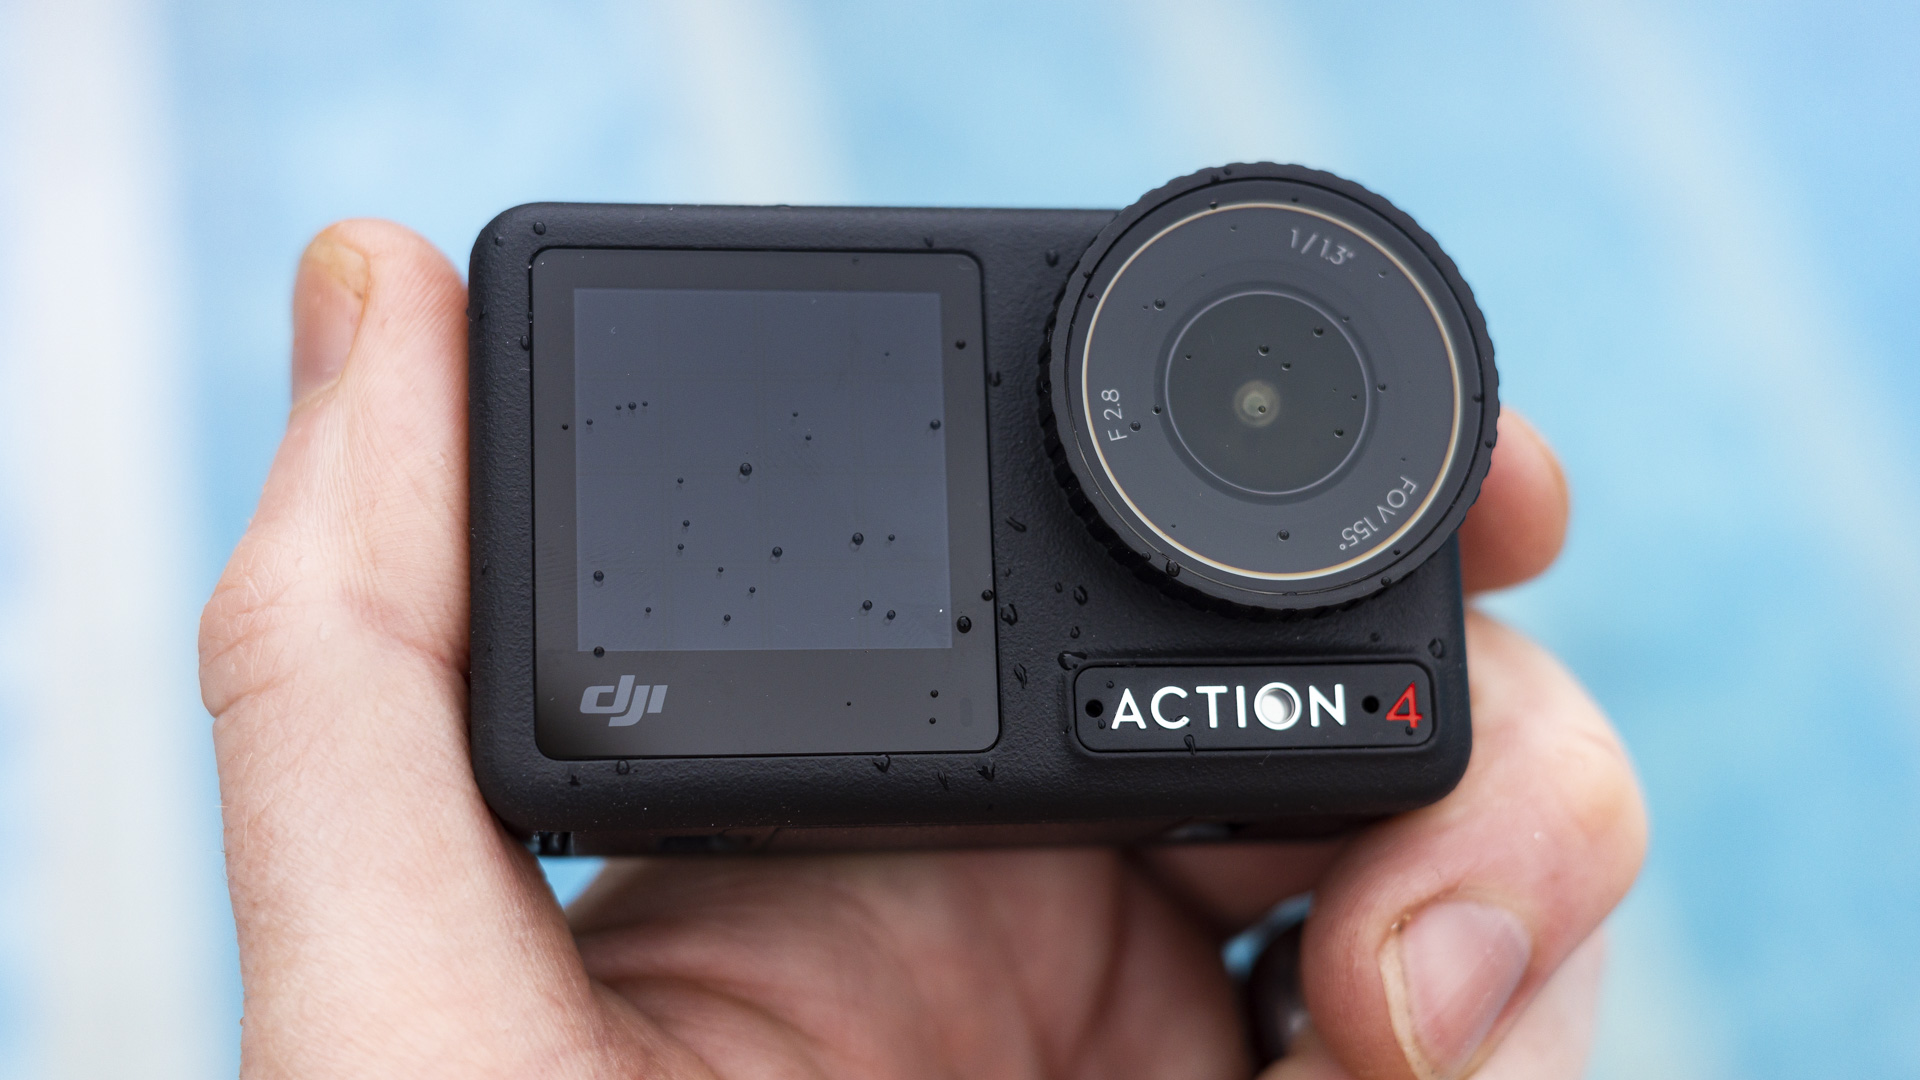 DJI Osmo Action 4 review: a polished GoPro alternative with hassle